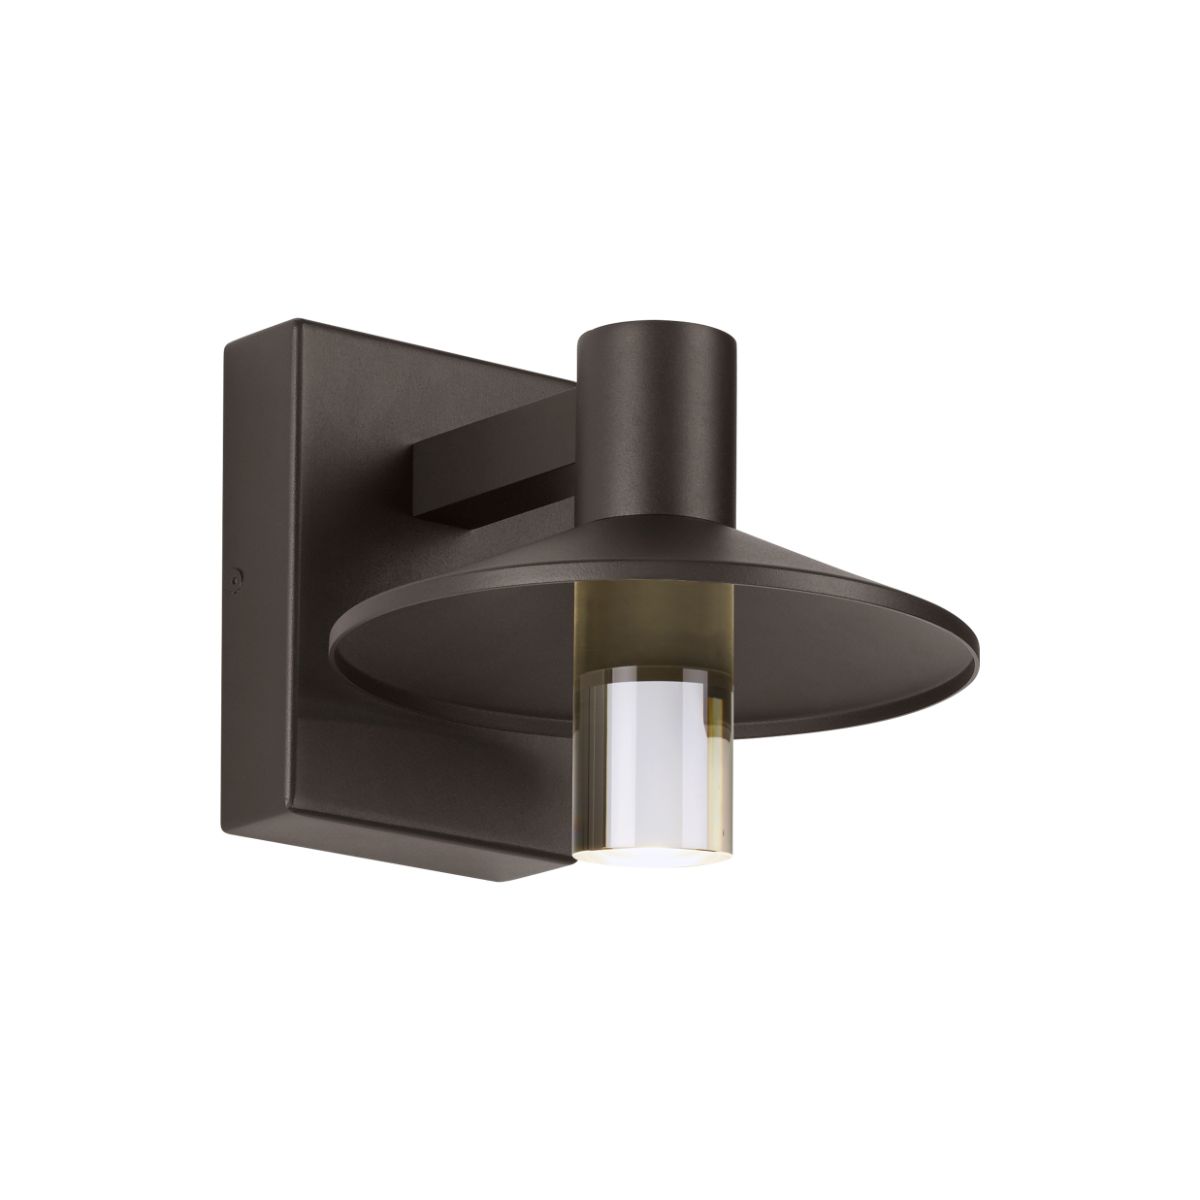 Ash 8 In. LED Hi-Output Outdoor Wall Sconce 1189 Lumens 2700K